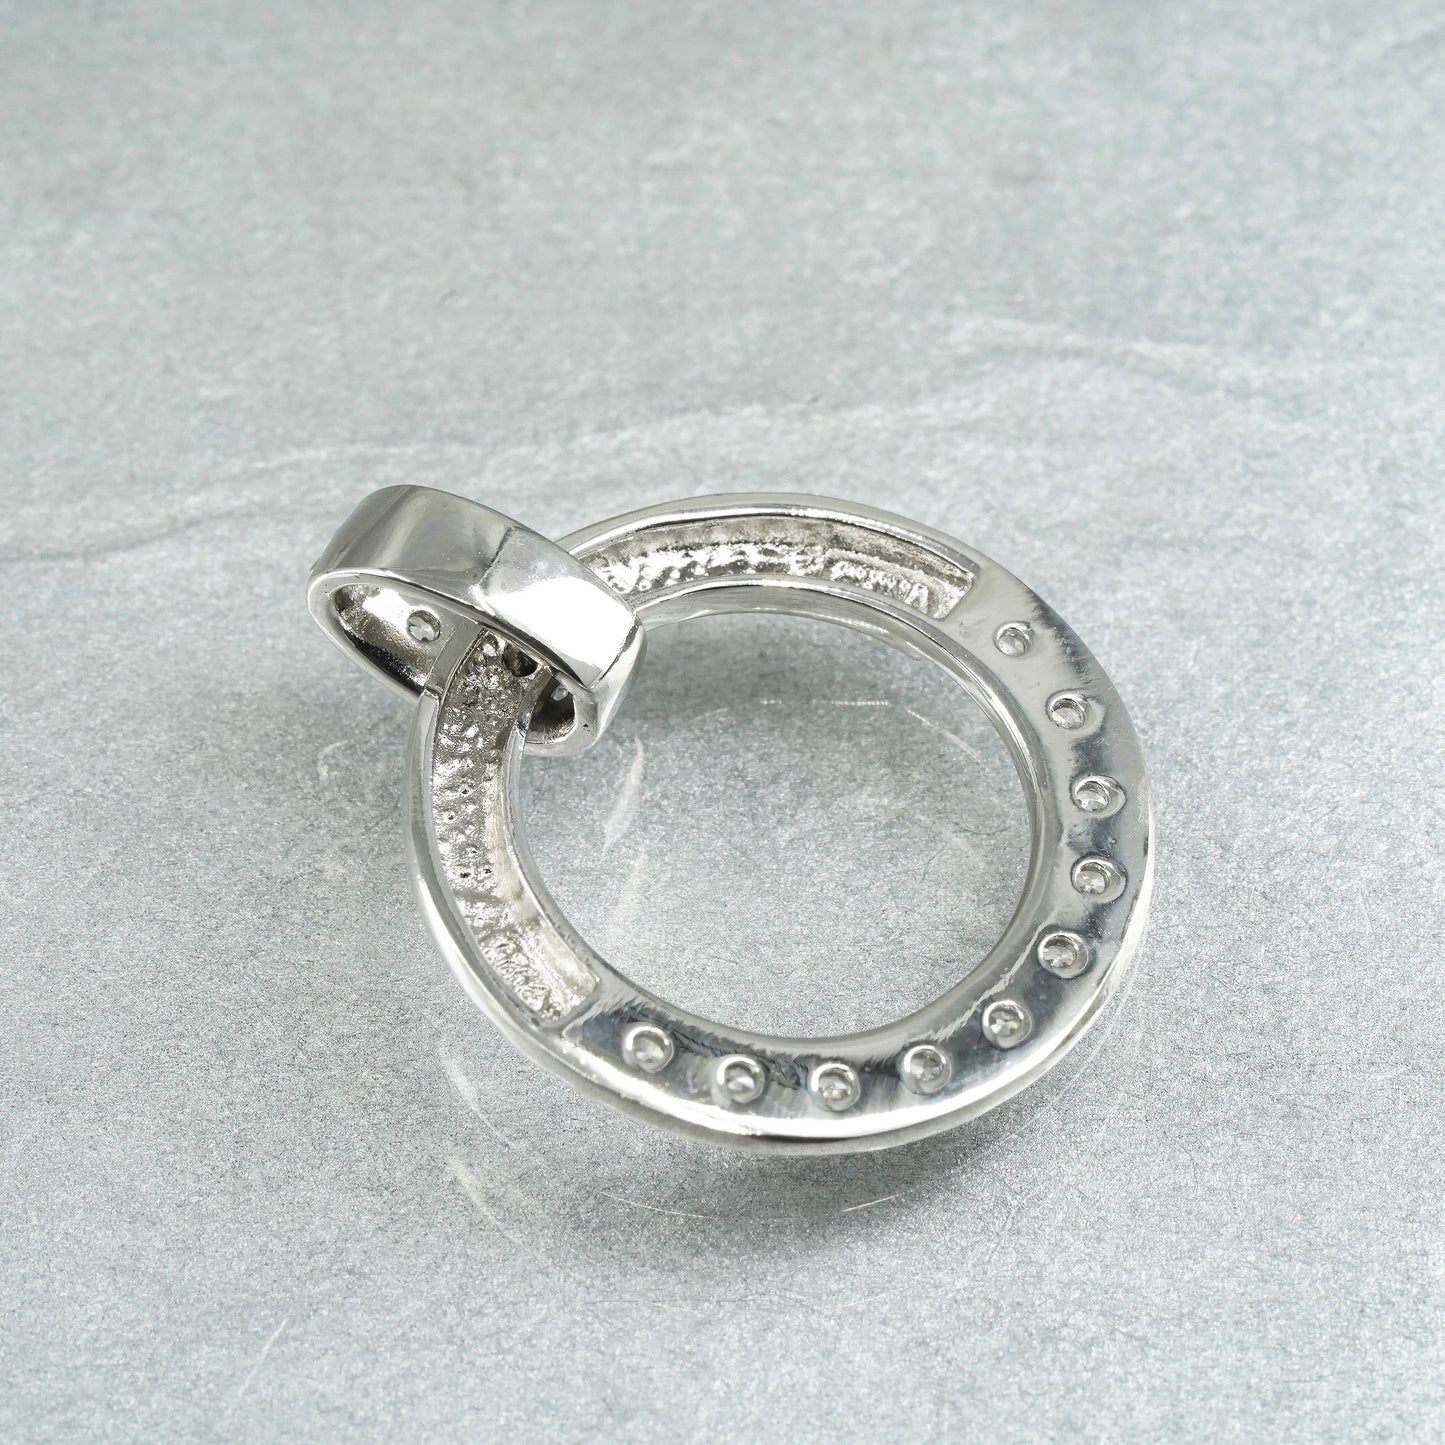 Vintage sterling 925 silver circle pendant with round Cz